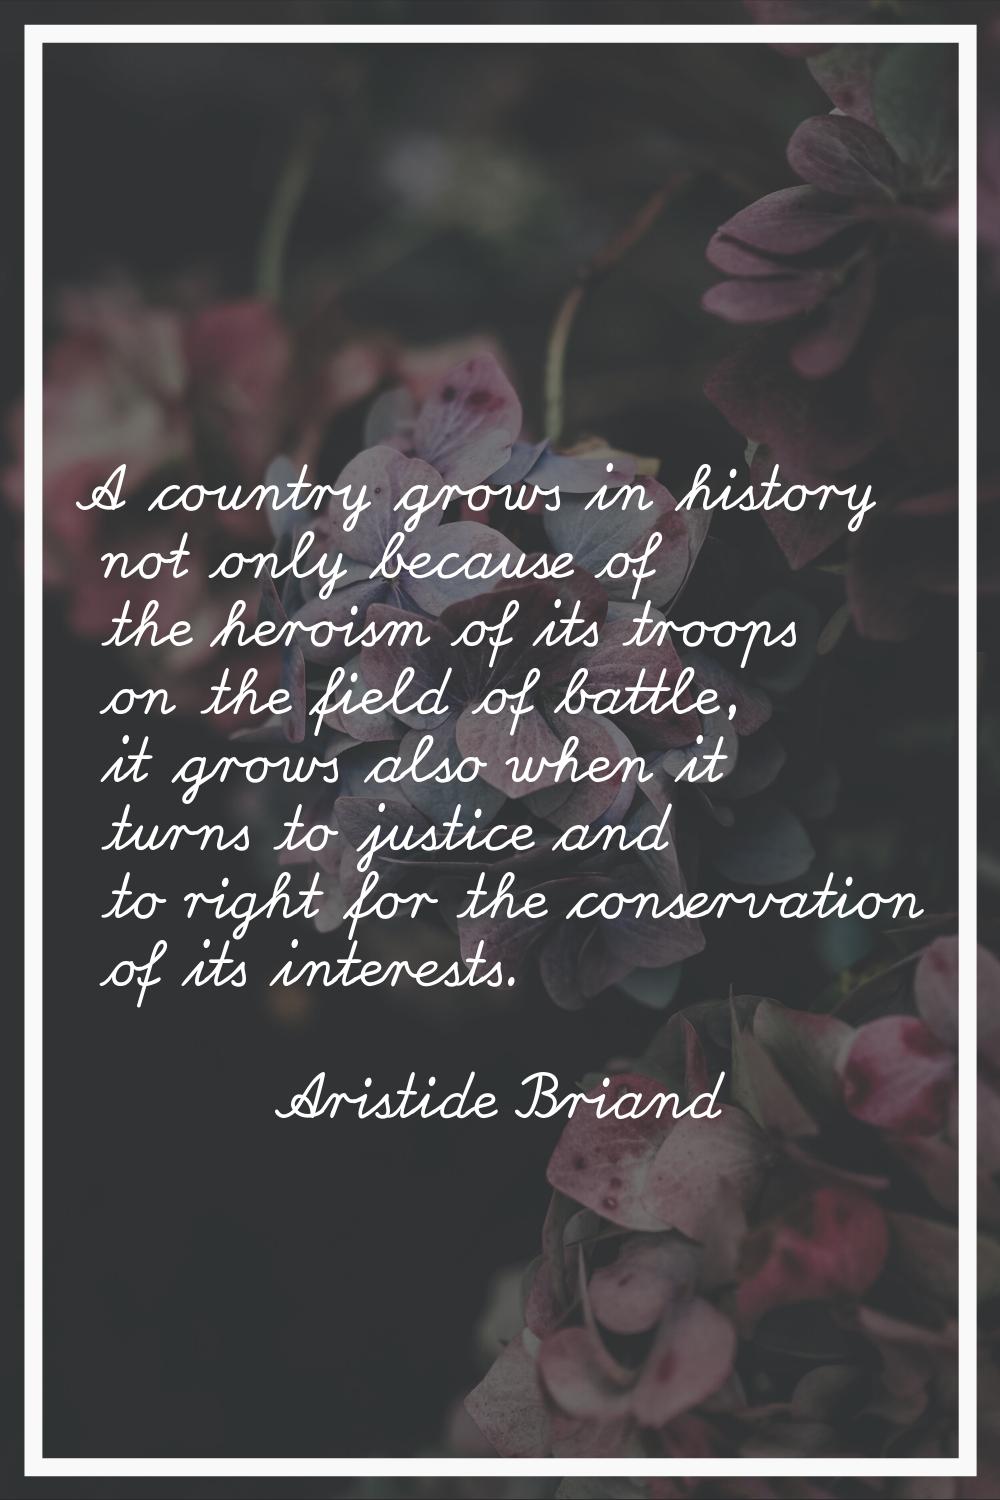 A country grows in history not only because of the heroism of its troops on the field of battle, it